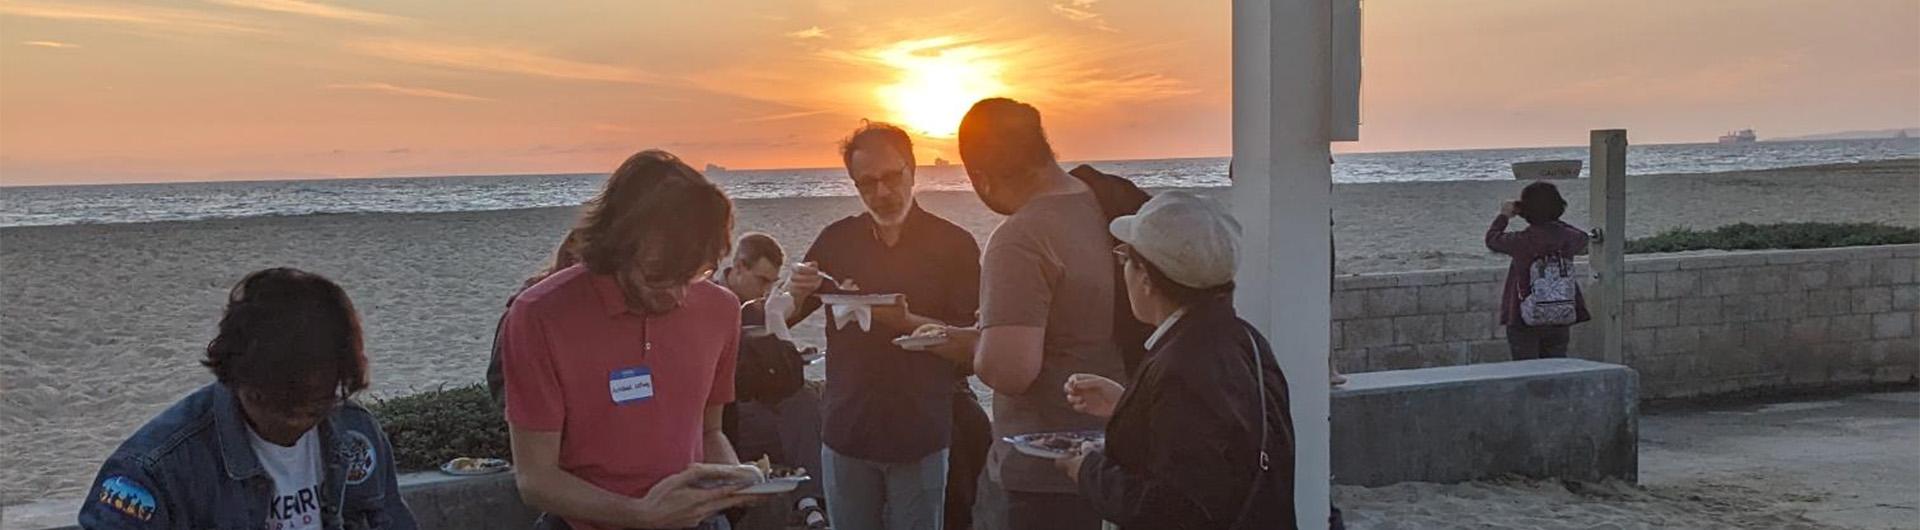 people eating dinner on the beach at sunset